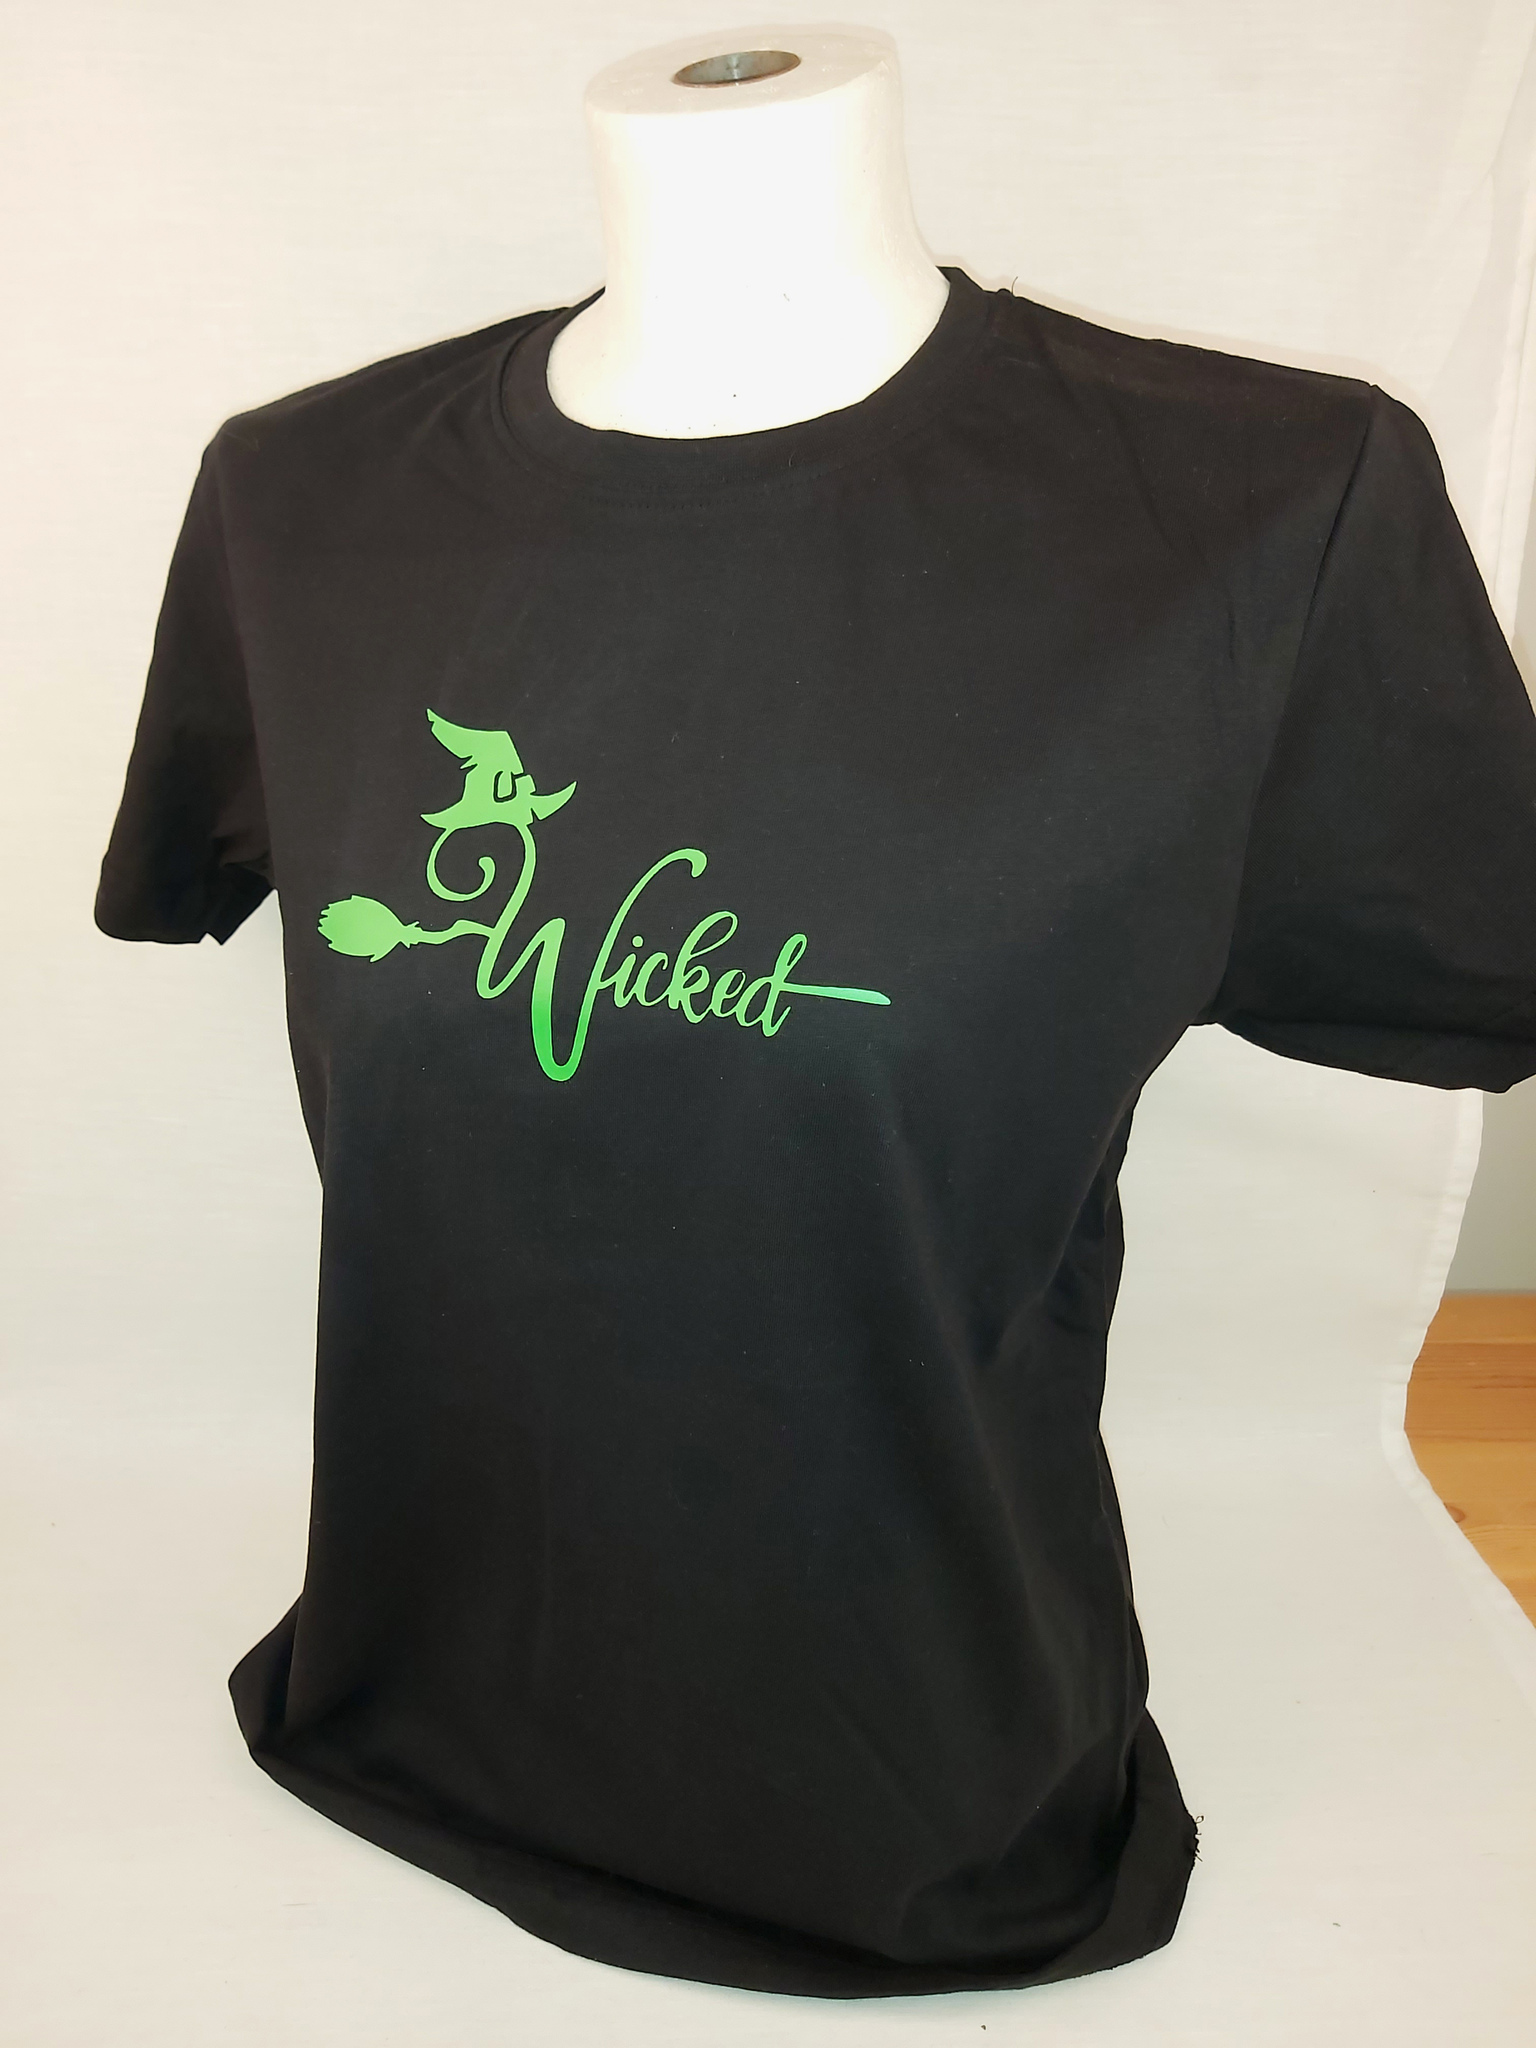 Wicked t-shirt